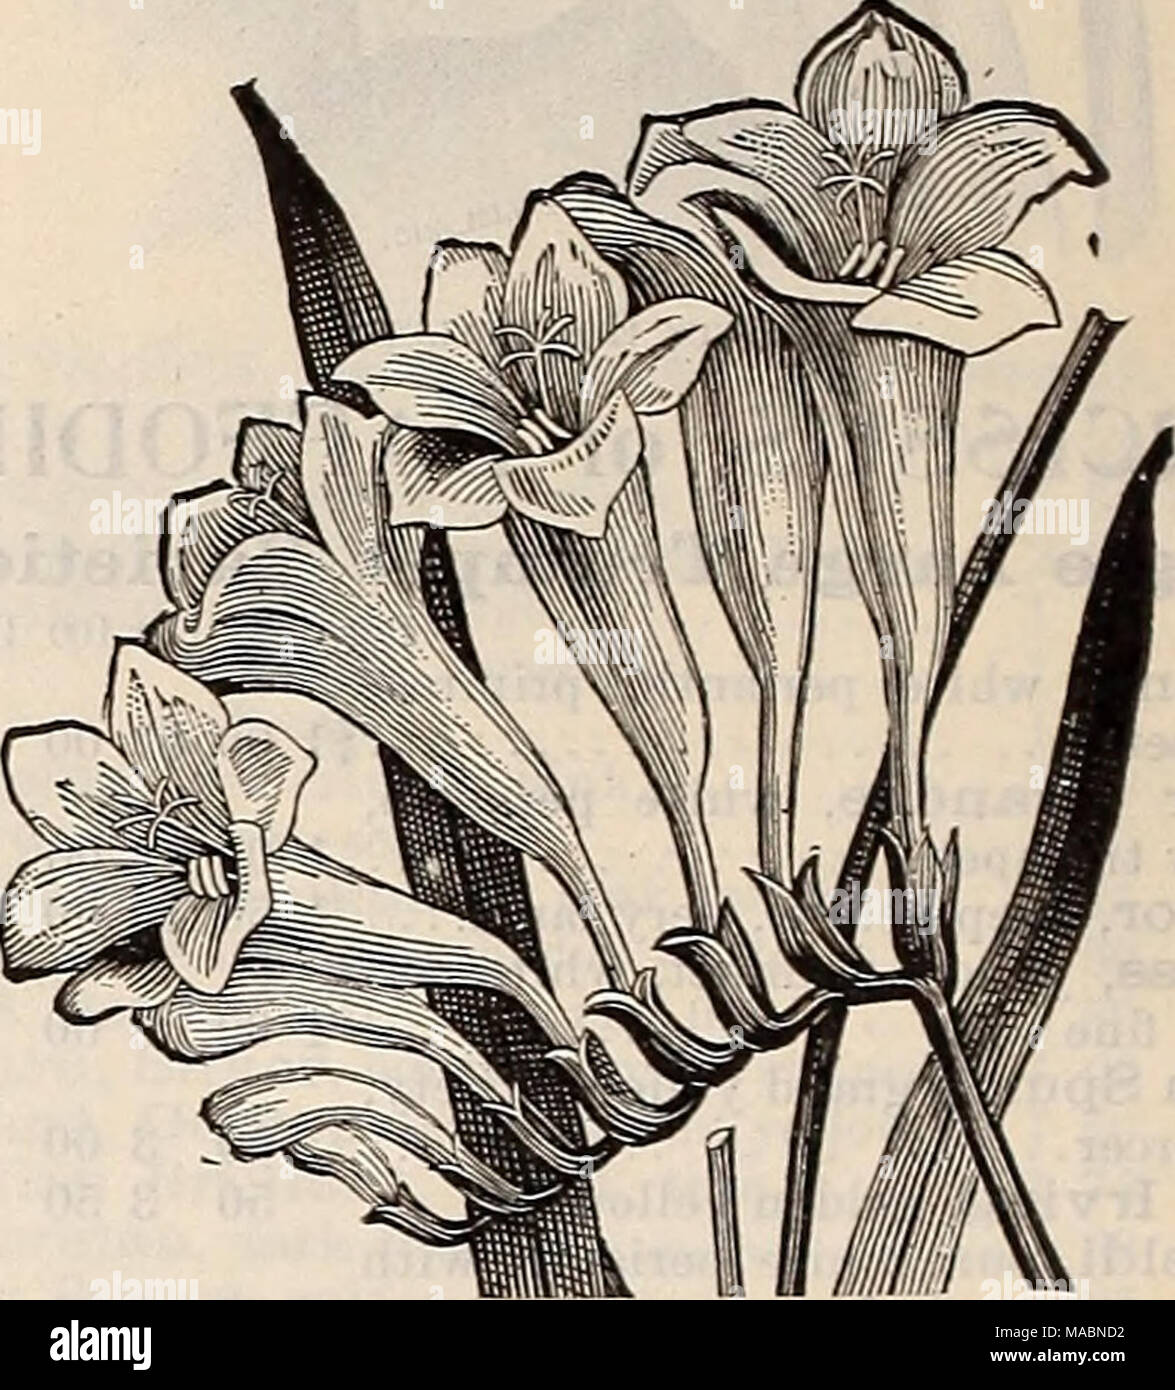 . Dreer's quarterly wholesale price list of bulbs, plants,seeds, &amp;c. : autumn edition, September 1896 December . 3 00 5 25 3 00 2 50 2 50 2 50 2 50 Freesia refracta alba, selected &quot; '' &quot; first size Leichtlinii Gladiolus, The Bride Gloxinia,, choice mixed Hemerocallis flava ;' fulva Iris, English mixÂ«d &quot; Spanish, William I. &quot; 'â¢ Mont Blanc &quot; &quot; Mixed &quot; Susiana 'â Germanica, 10 named sorts &quot; &quot; mixed &quot; Ksempferii, 10 named sorts mixed Â» '' Pavonia Ixia, crateroides 1' mixed .... Lachenalia pendula tricolor Ornithogalum arabicum Oxalis Bowei  Stock Photo